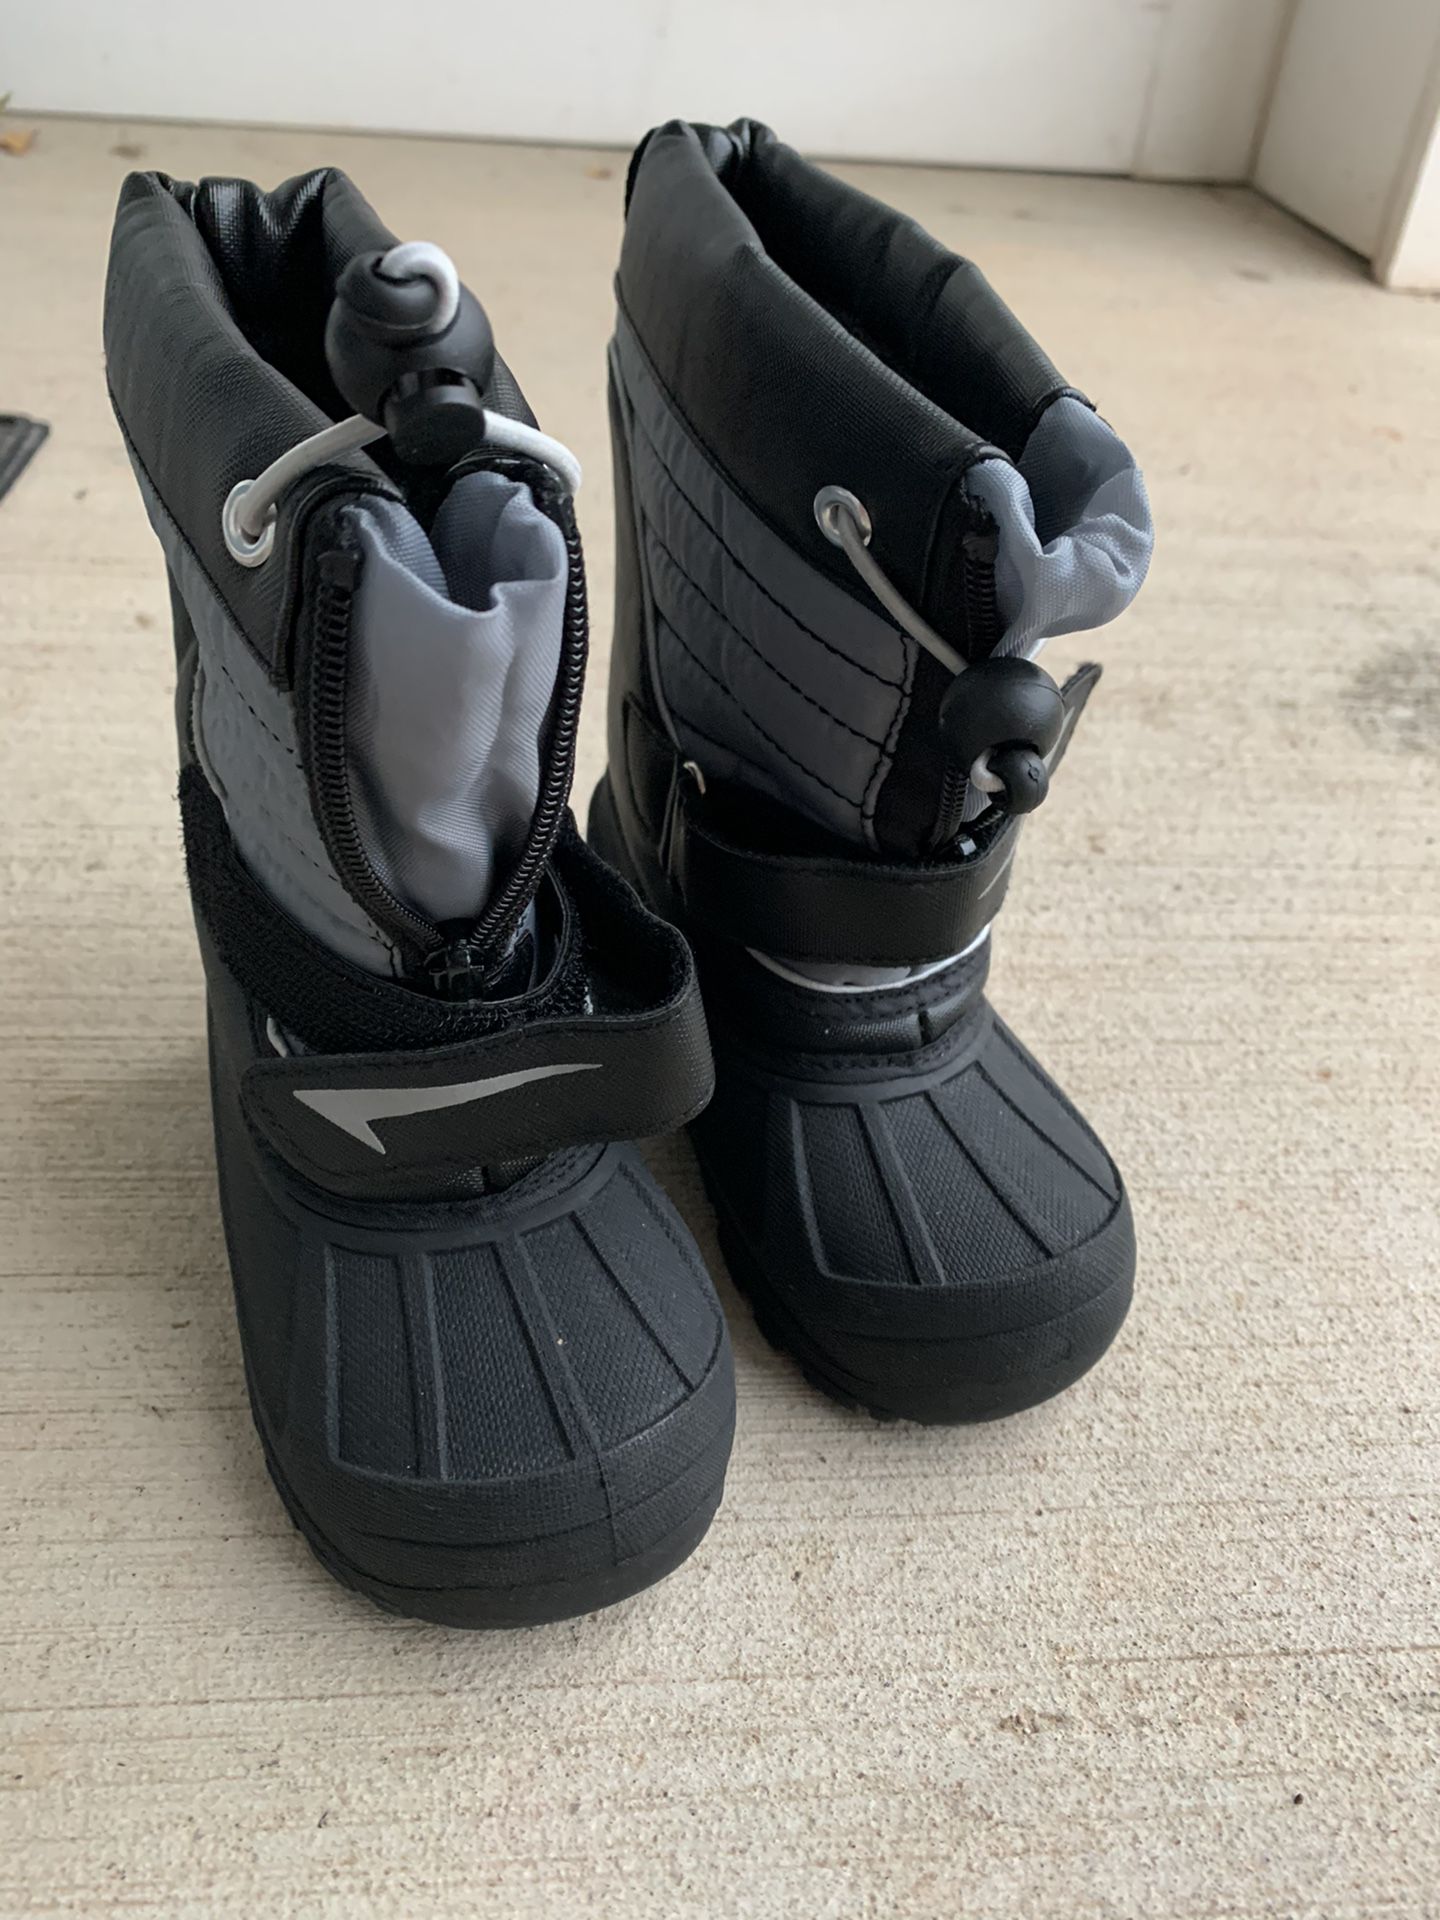 Snow boots Age 2-3 years, size 8